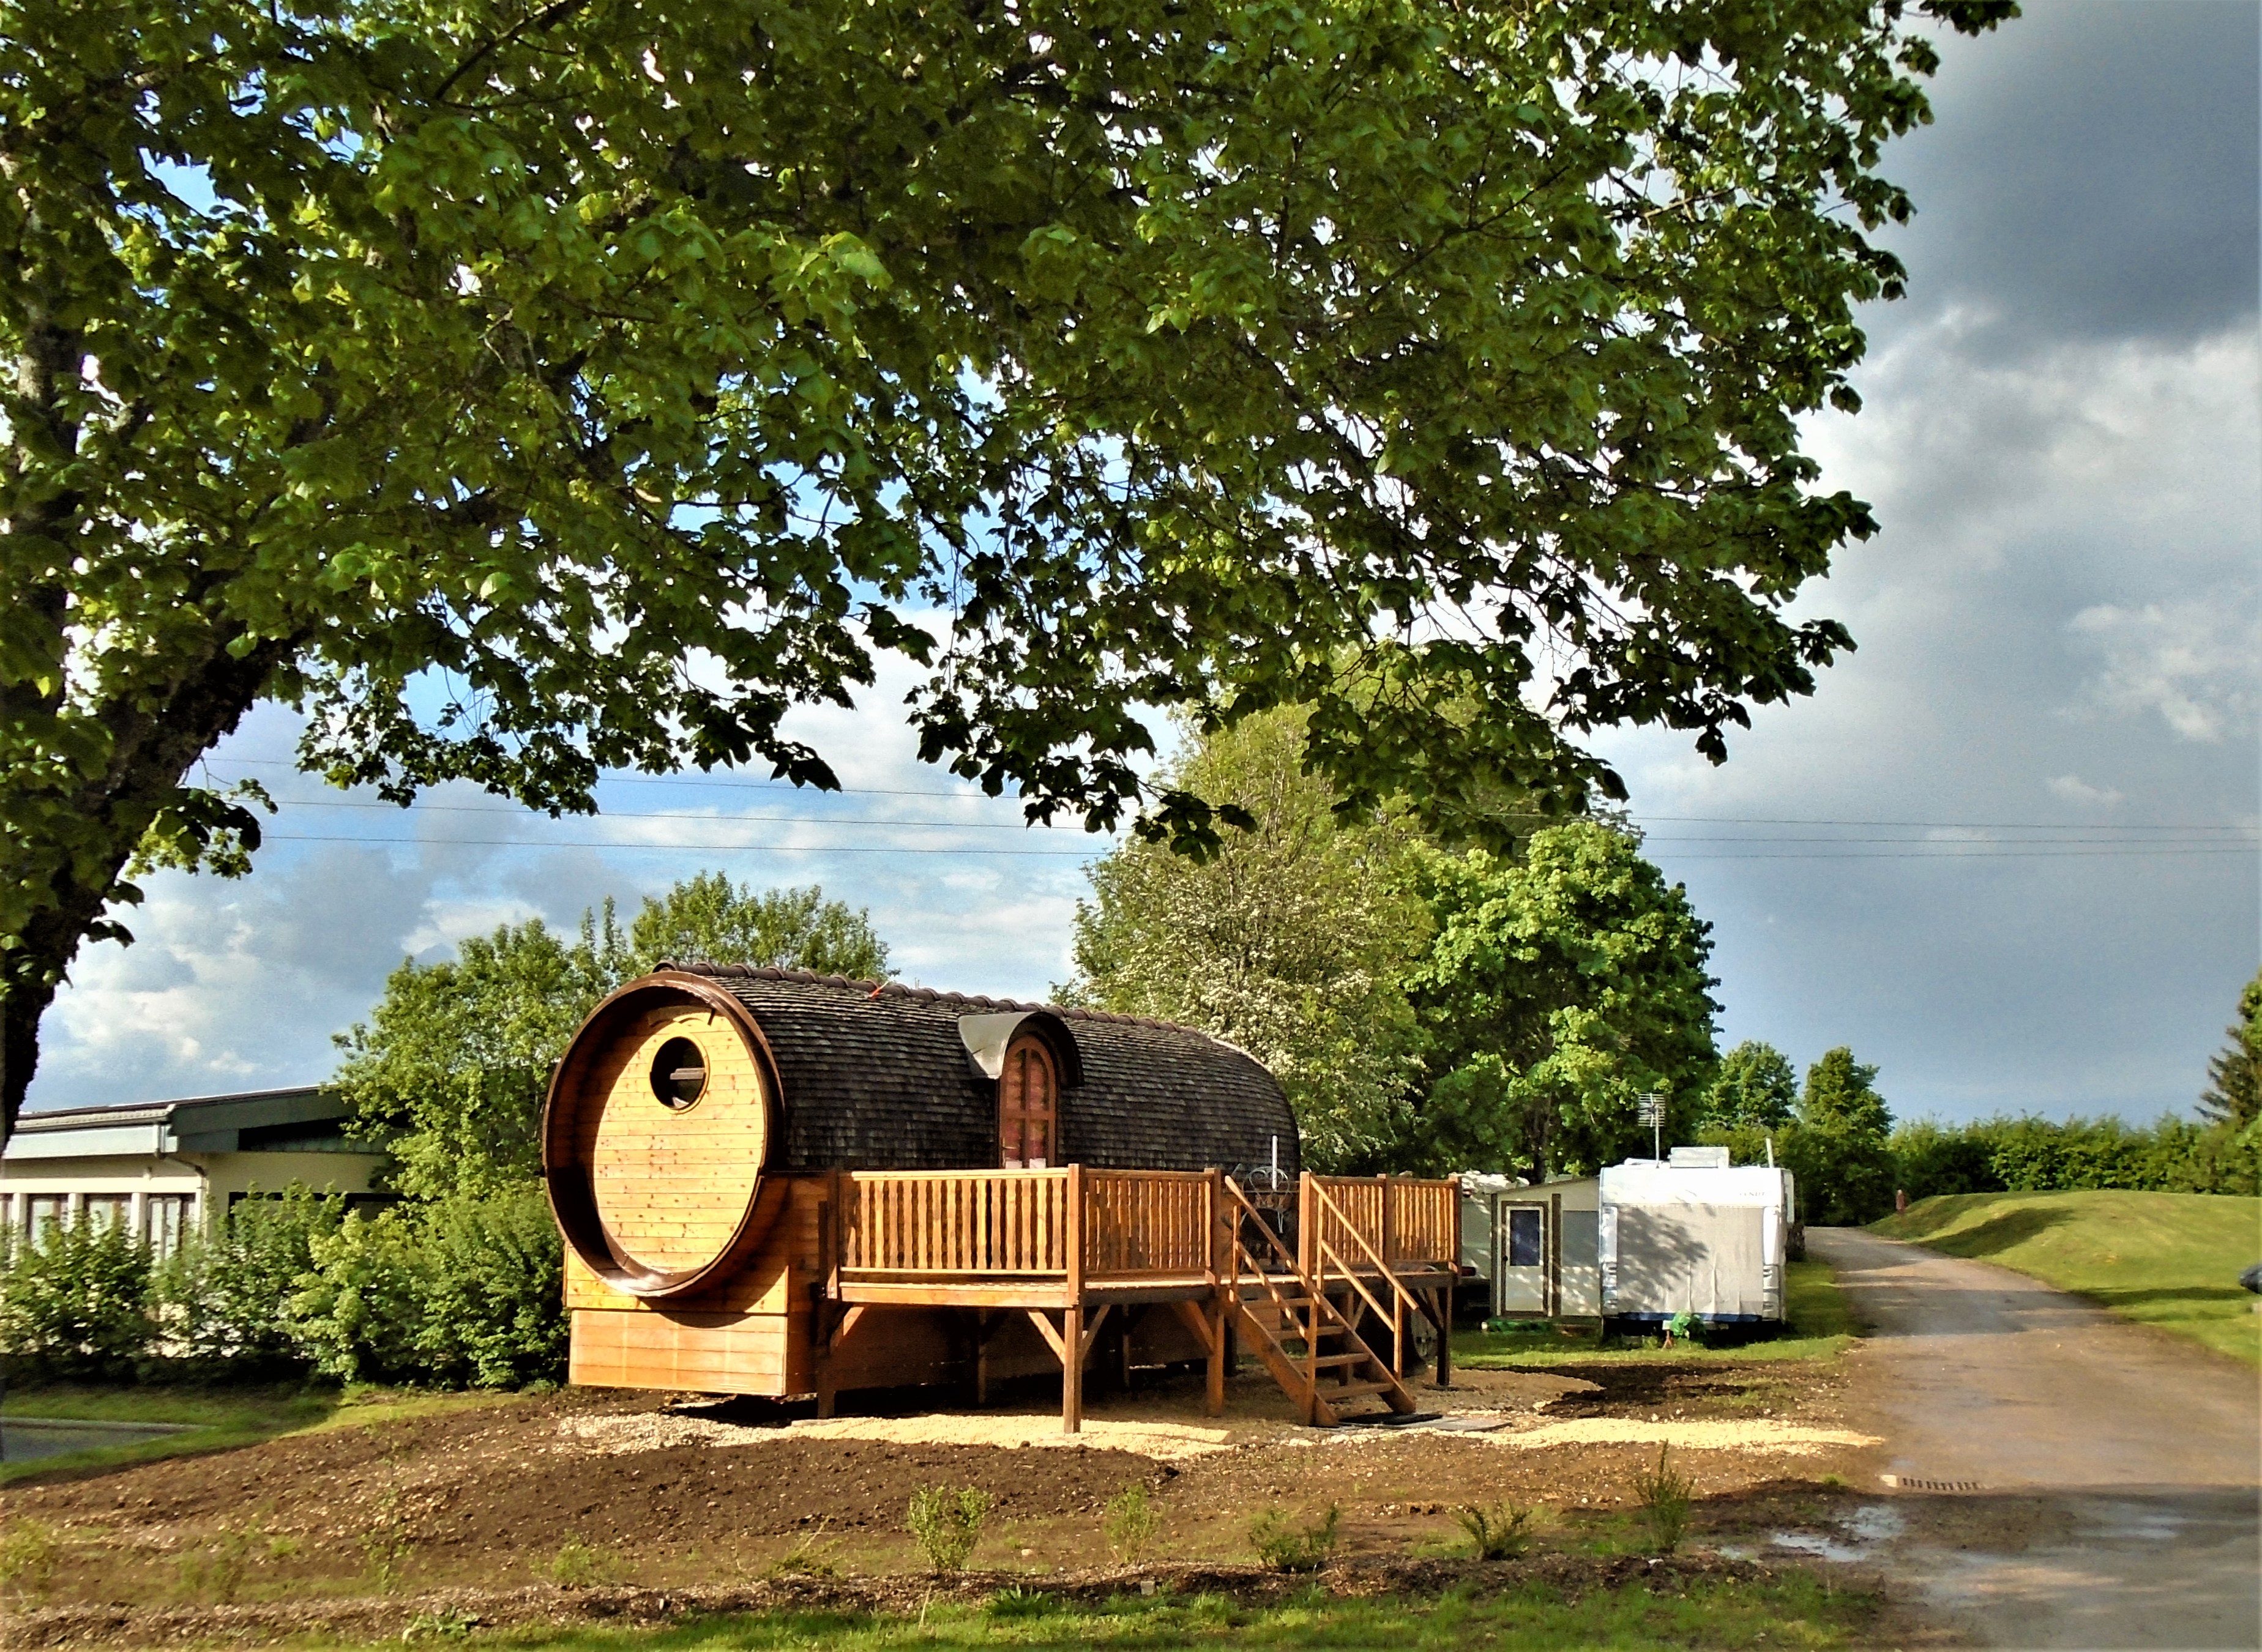 Accommodation - Welcoming Barrel - Camping Le Champ de Mars